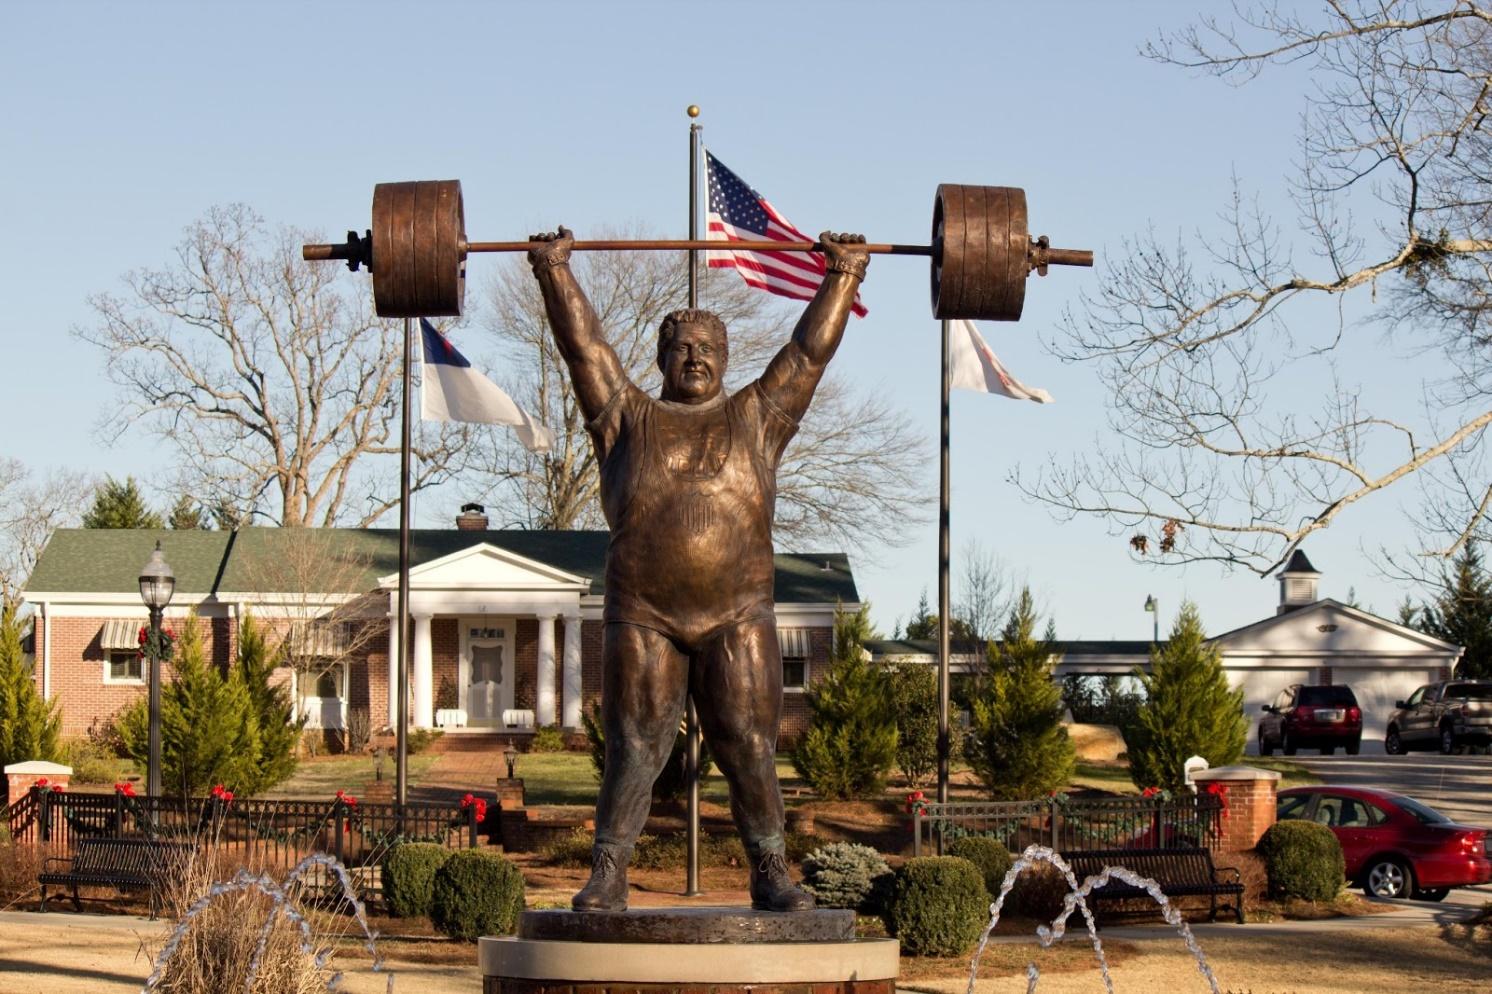 Paul Anderson (weightlifter) life-size bronze statue built in memory of "The World's Strongest Man." 